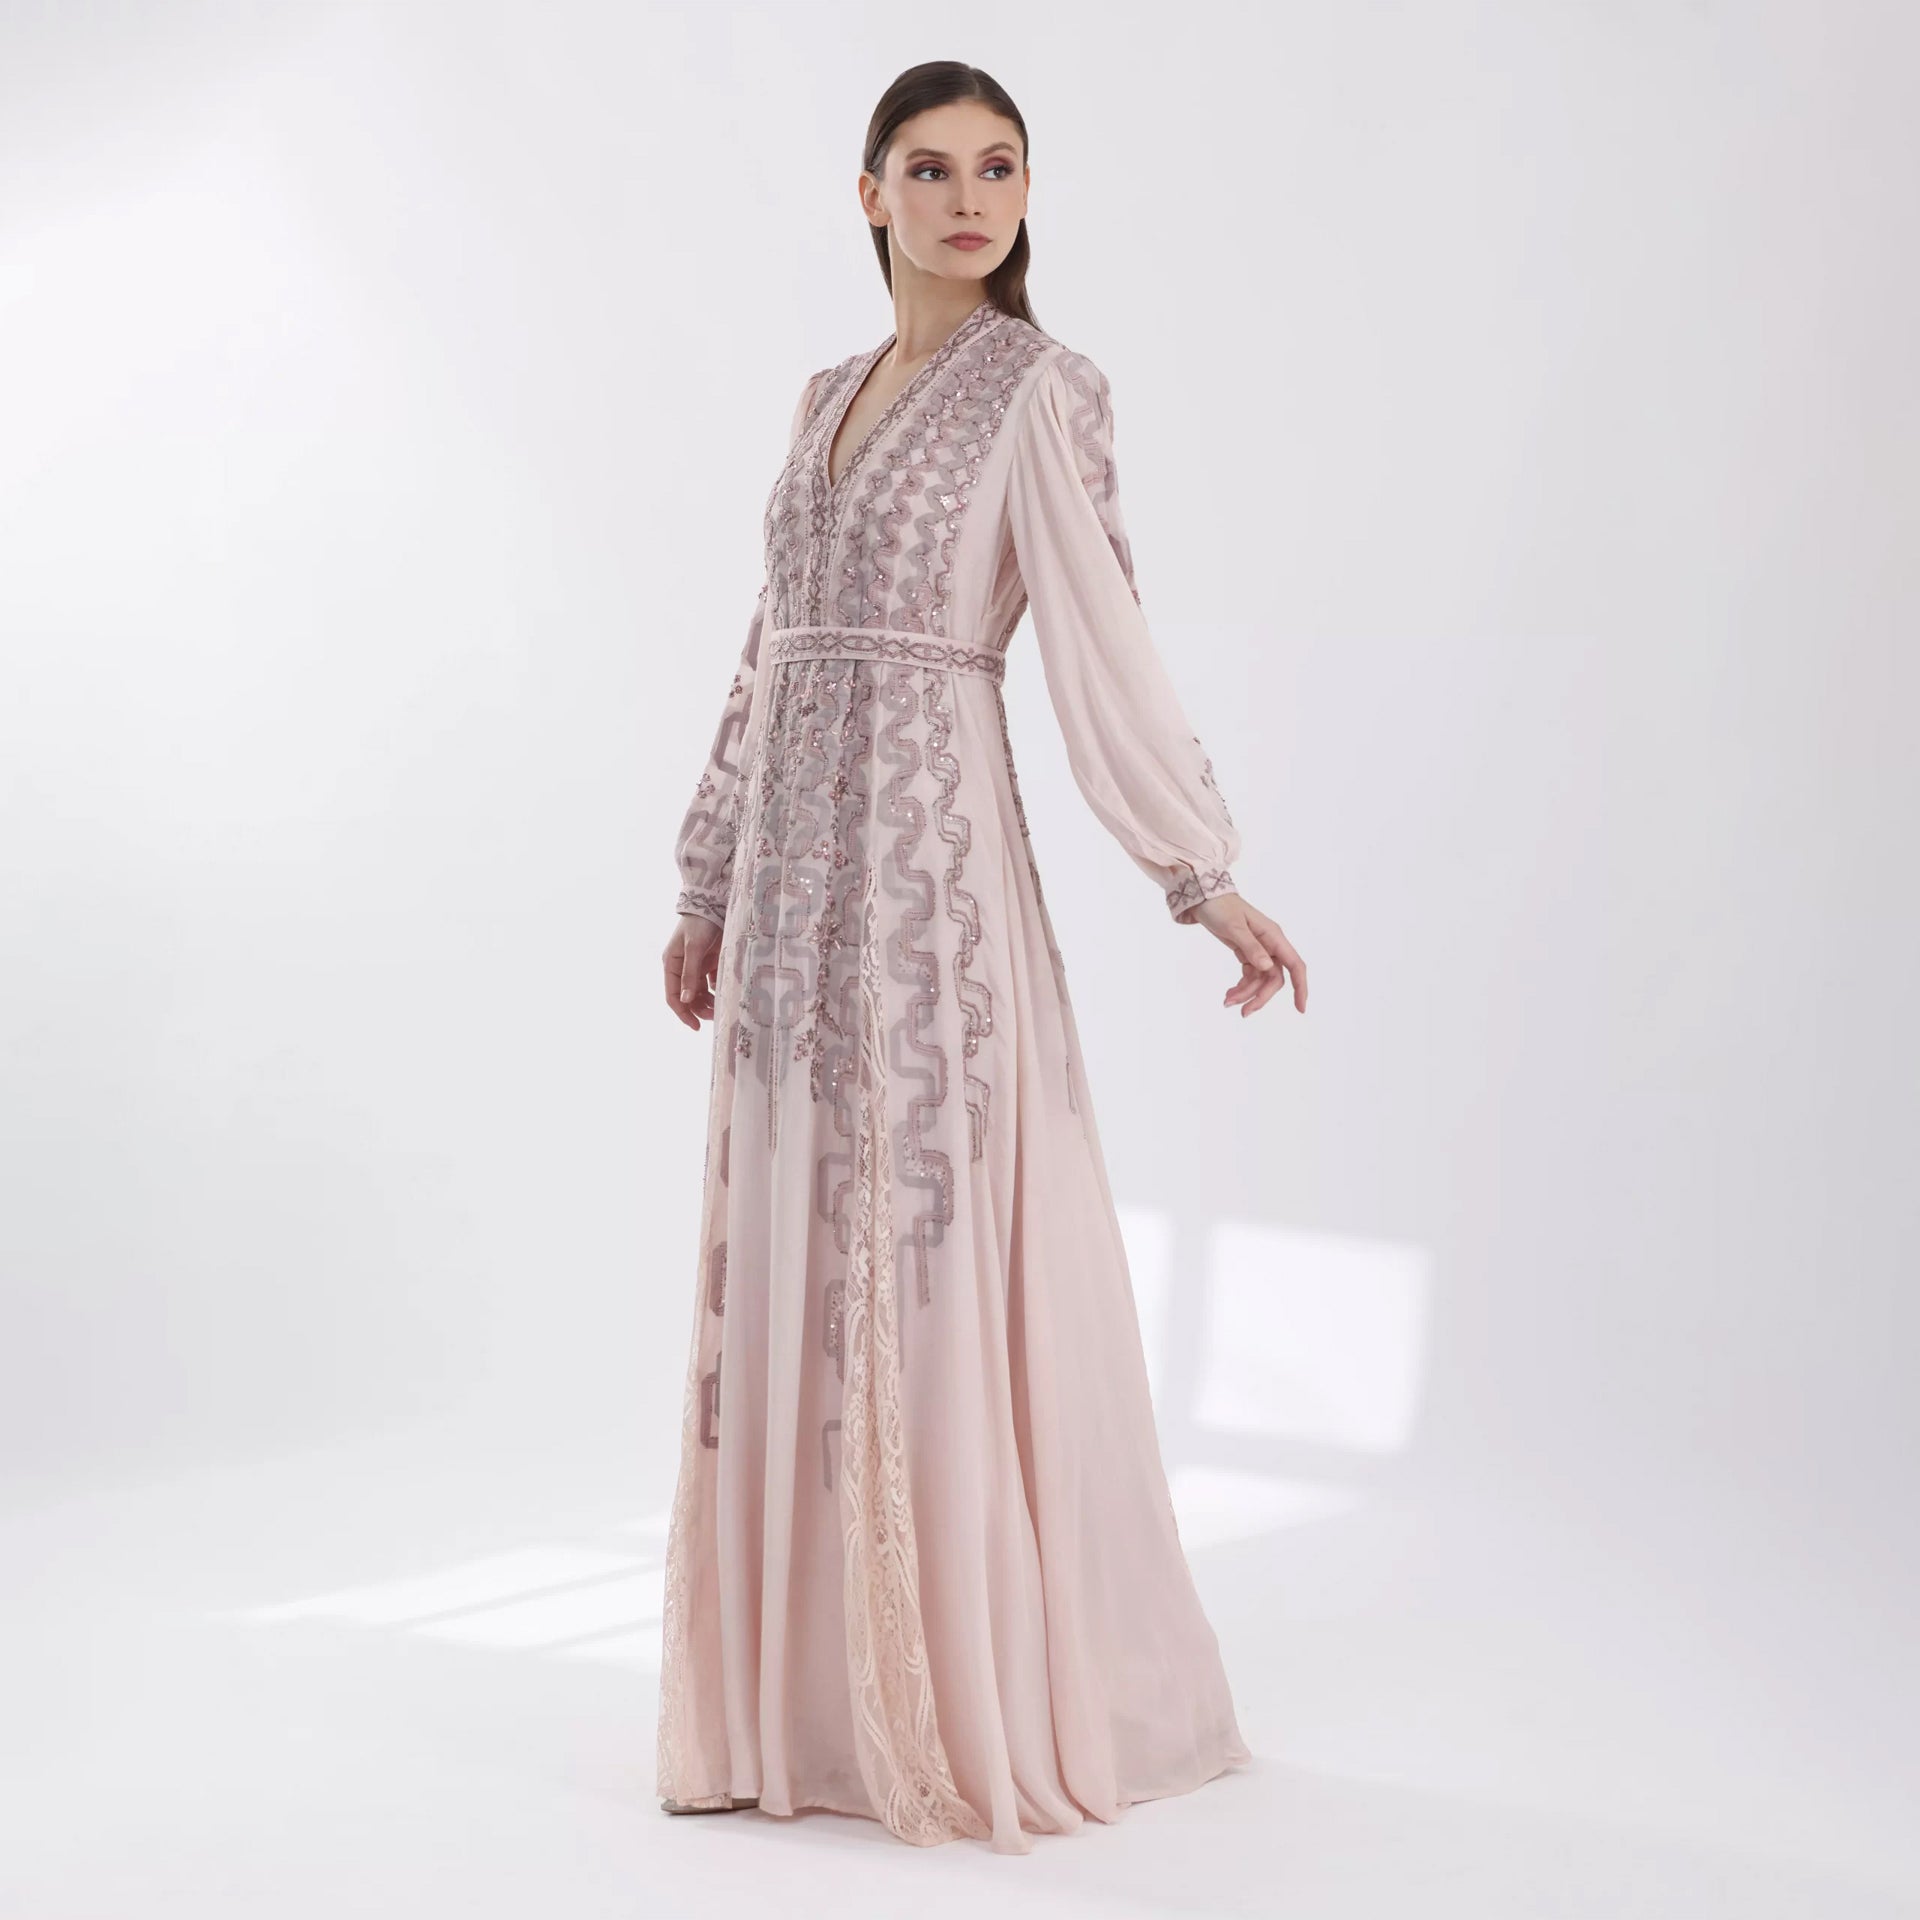 Beige Crepe Embroidery Aria Dress with Long Sleeves From Shalky